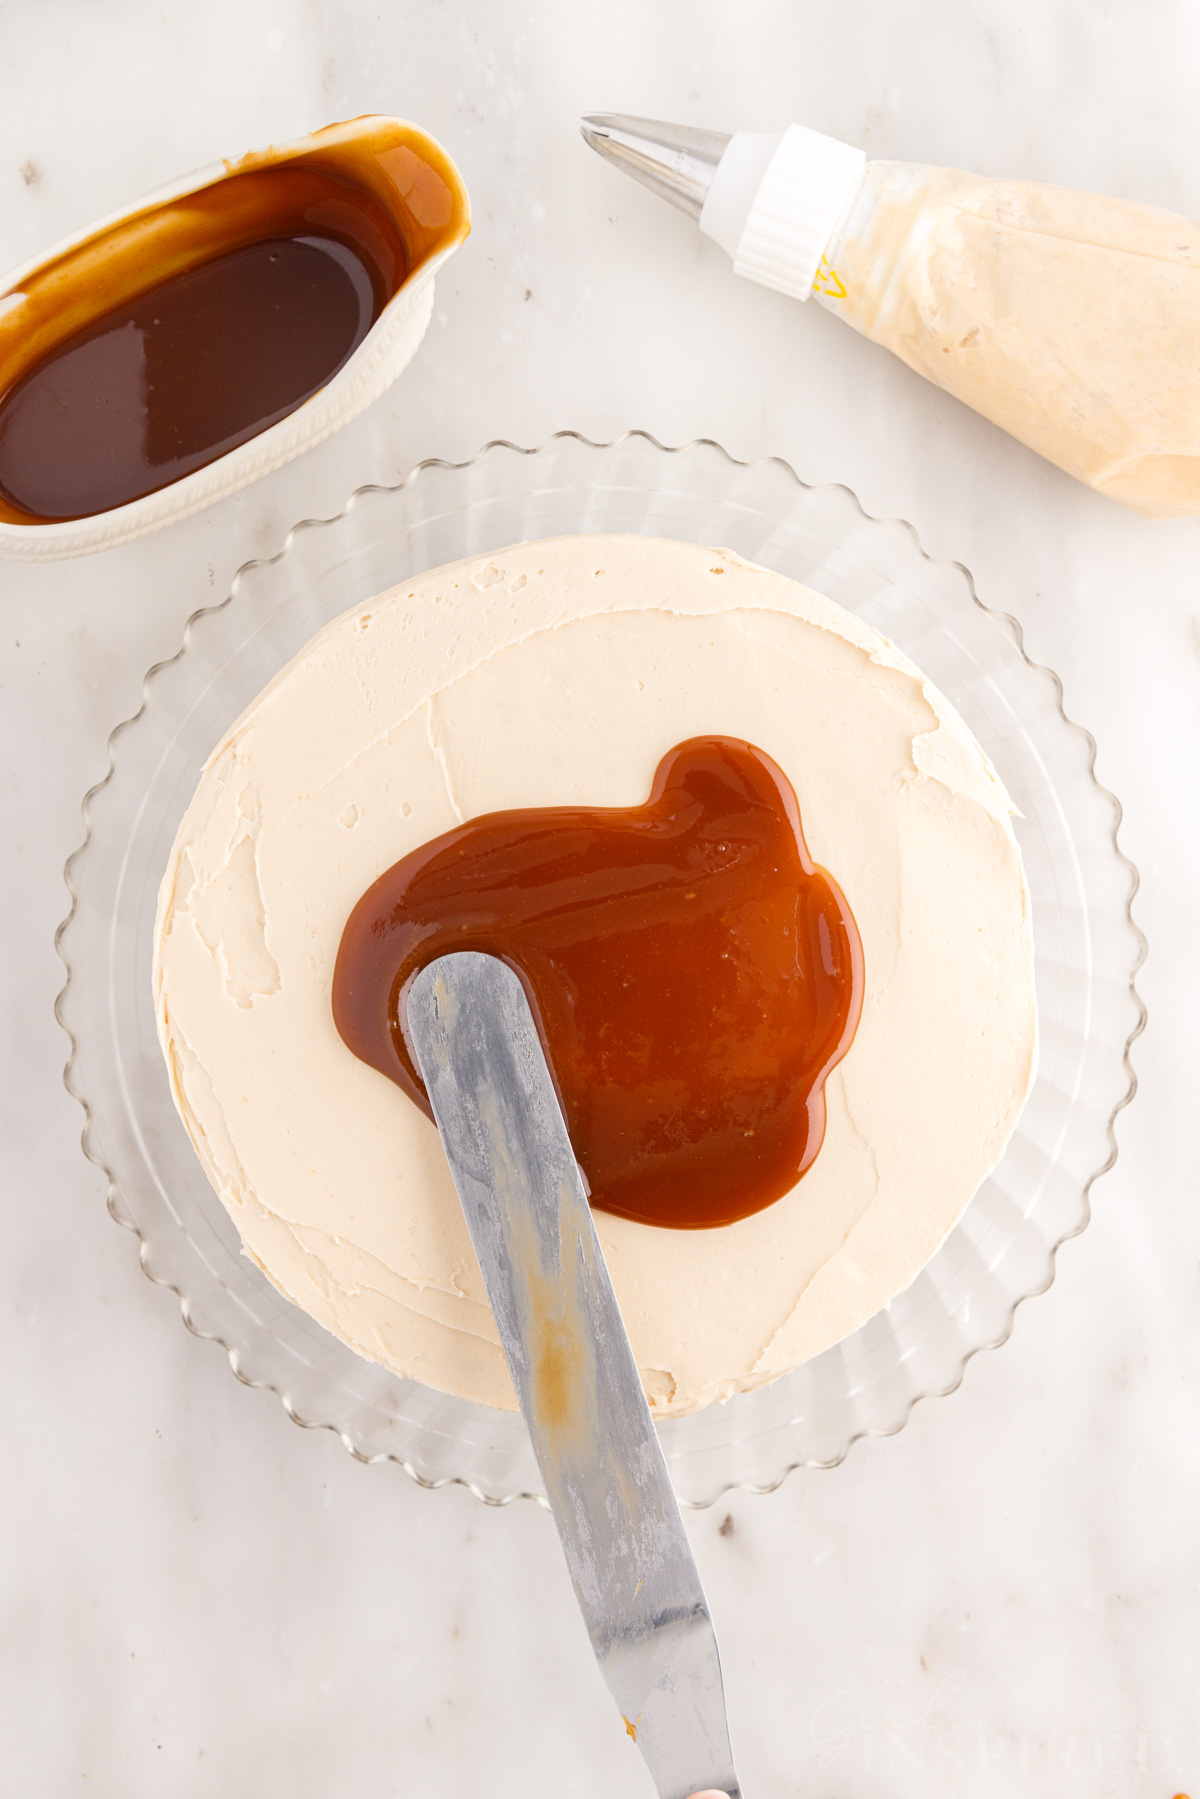 Icing spatula spreading a pool of caramel sauce over the top of the frosted salted caramel cake.